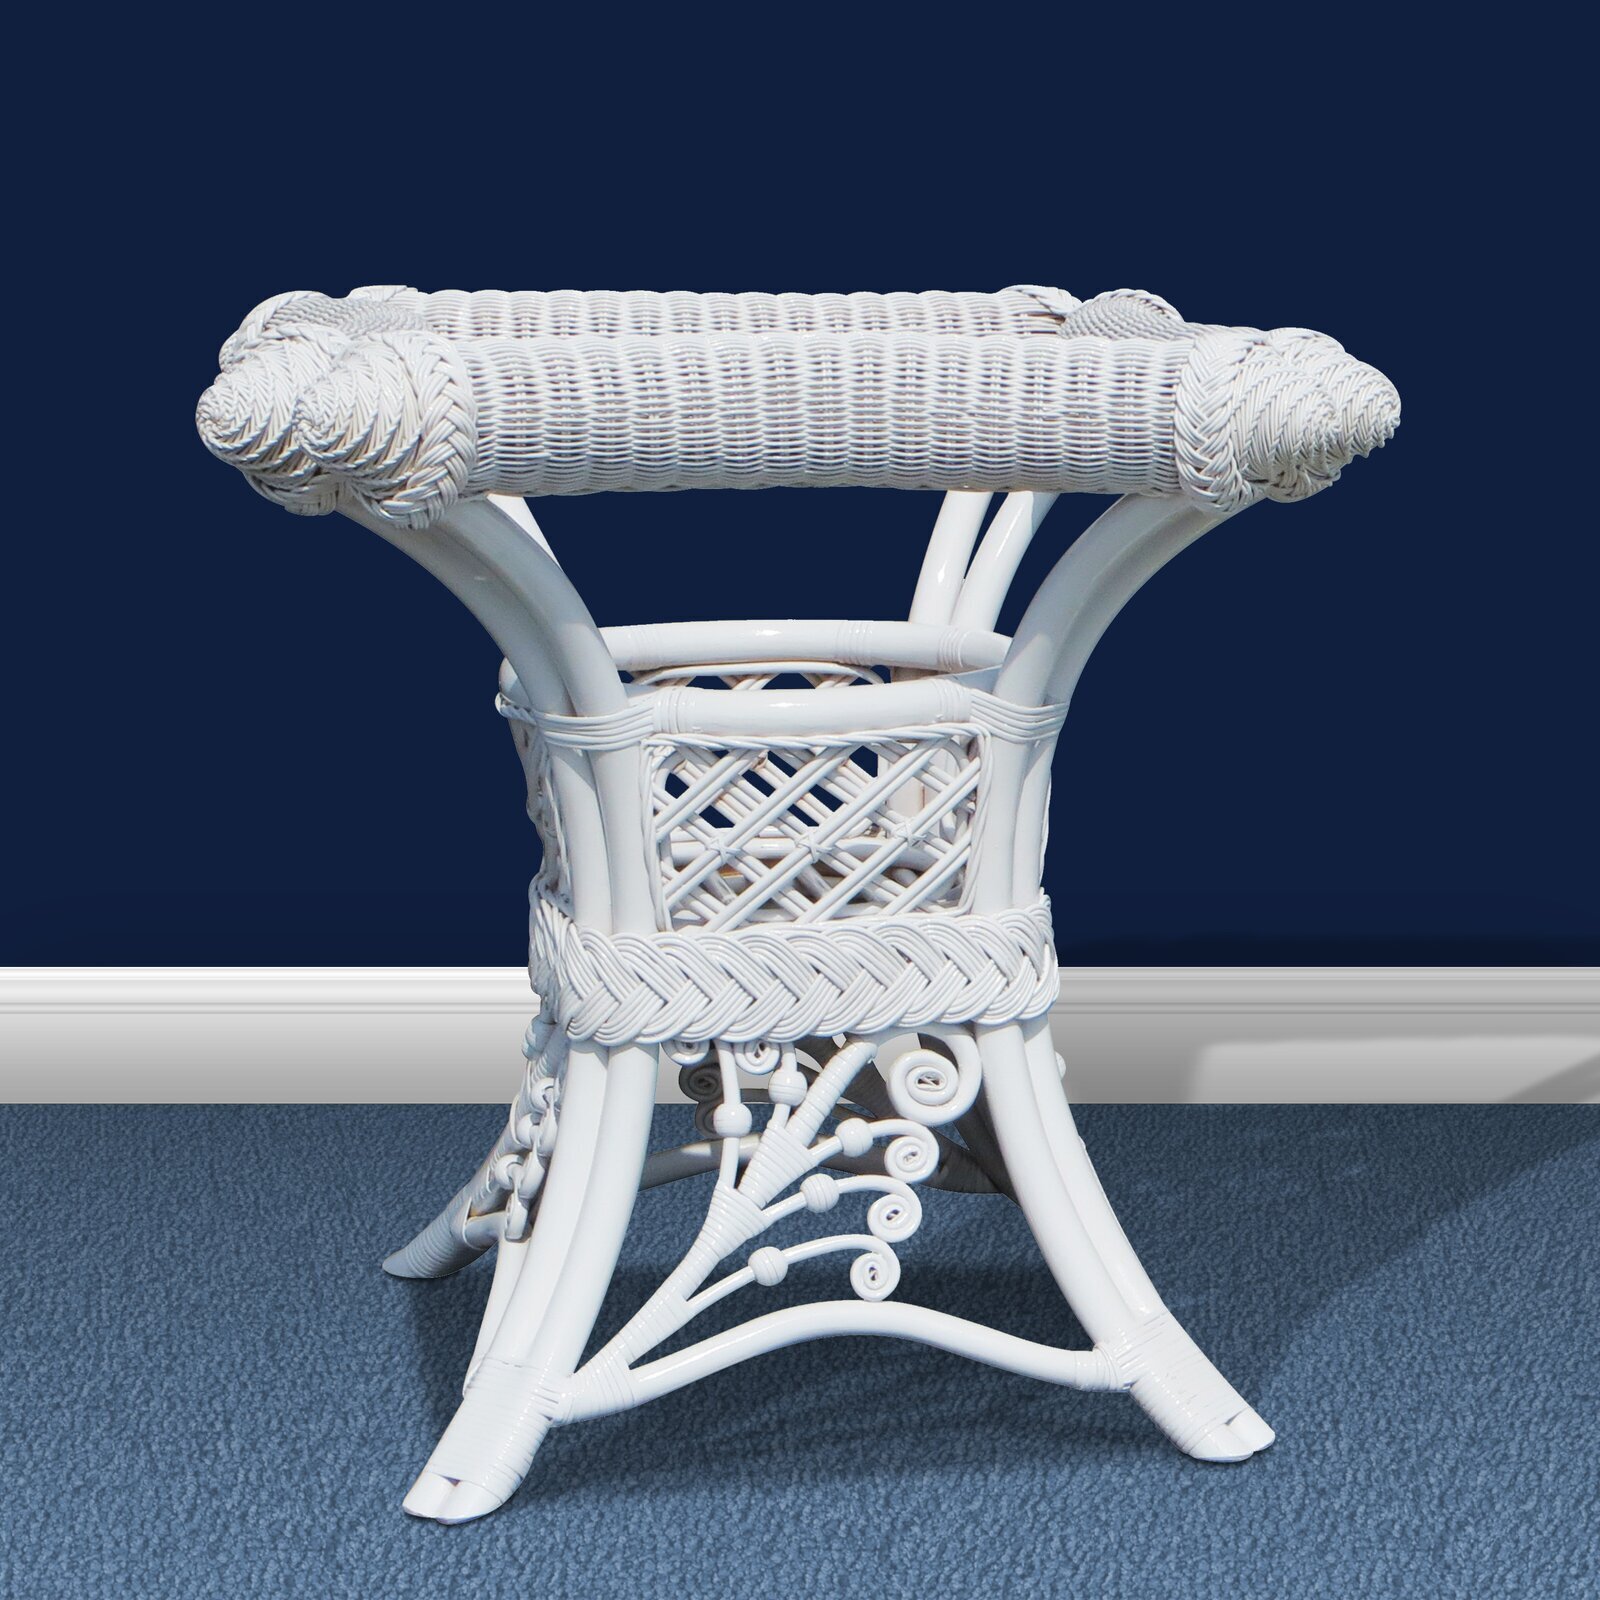 White Dining Table With Wicker Base